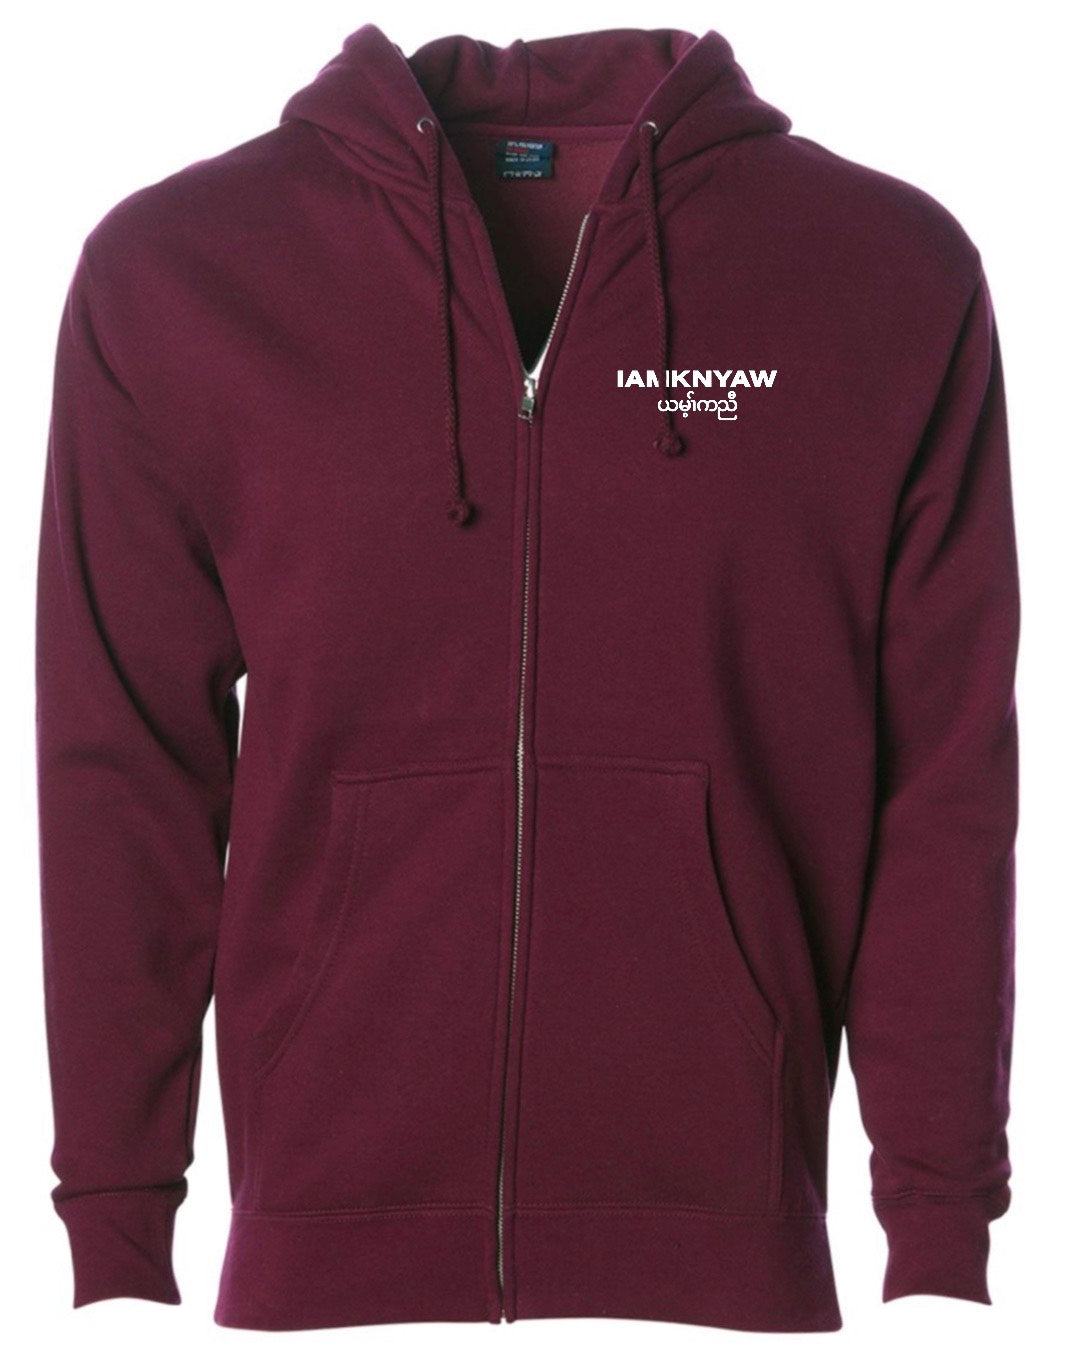 NEW! Limited Edition Full Zip Classic Hoodie